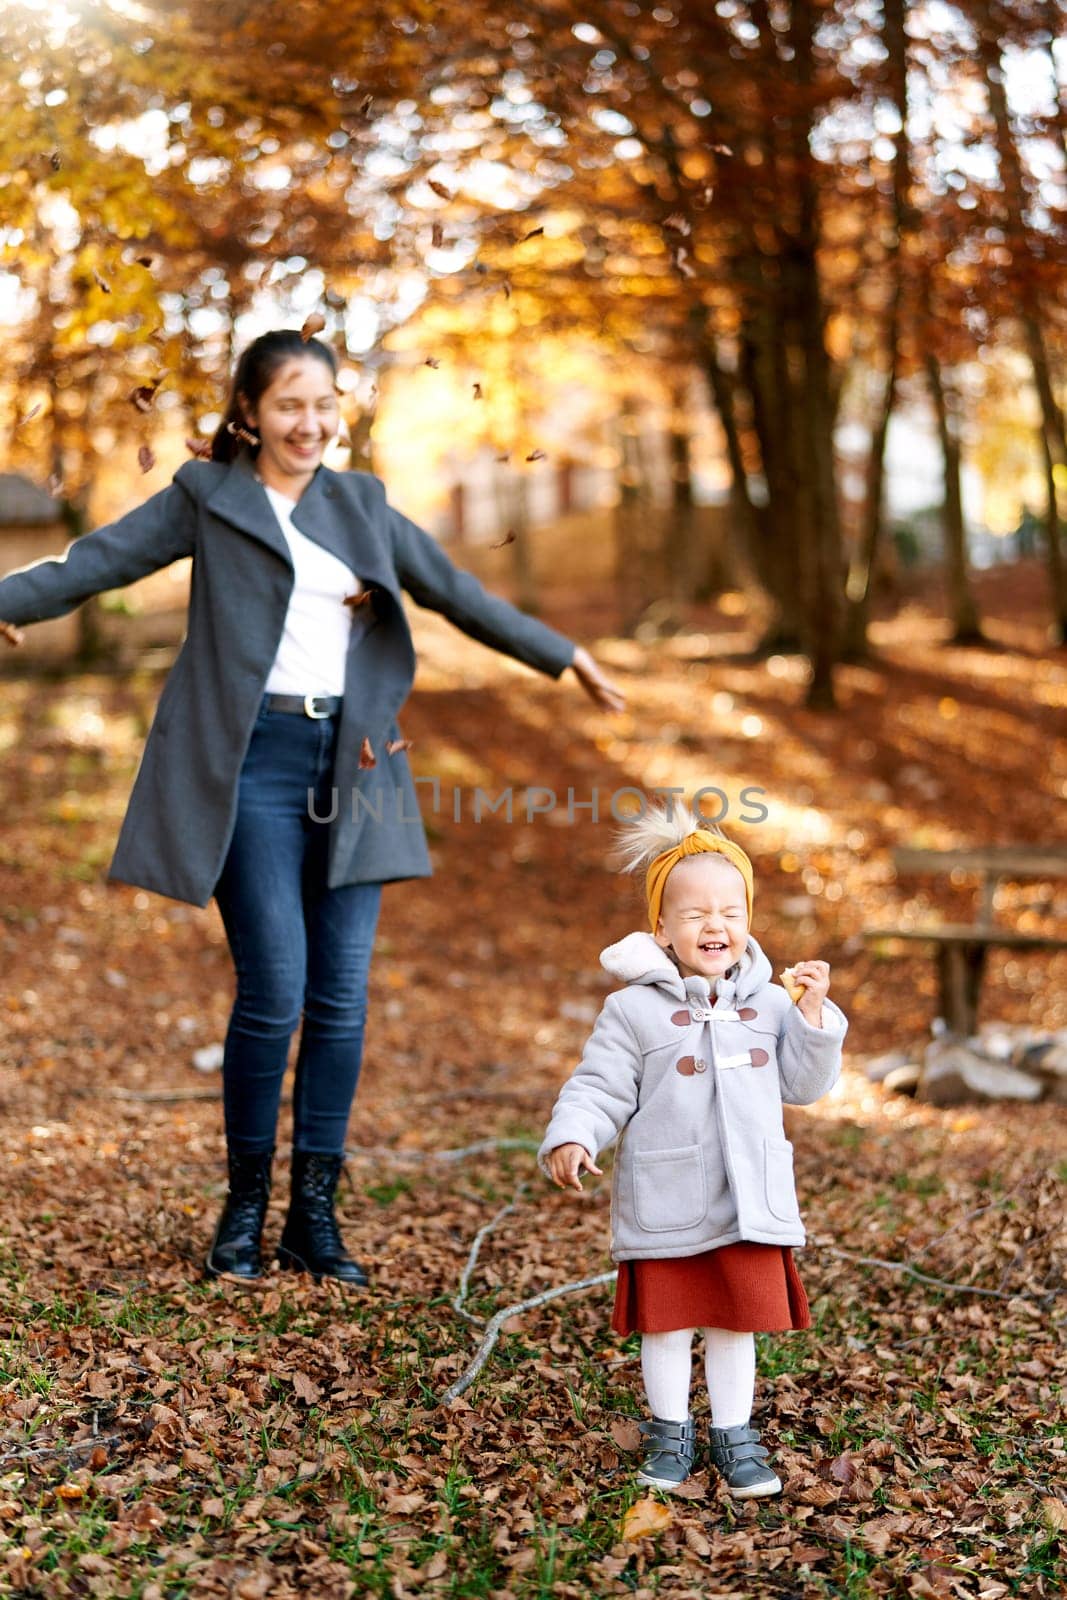 Smiling mom throws up fallen leaves over a little laughing girl in an autumn park by Nadtochiy